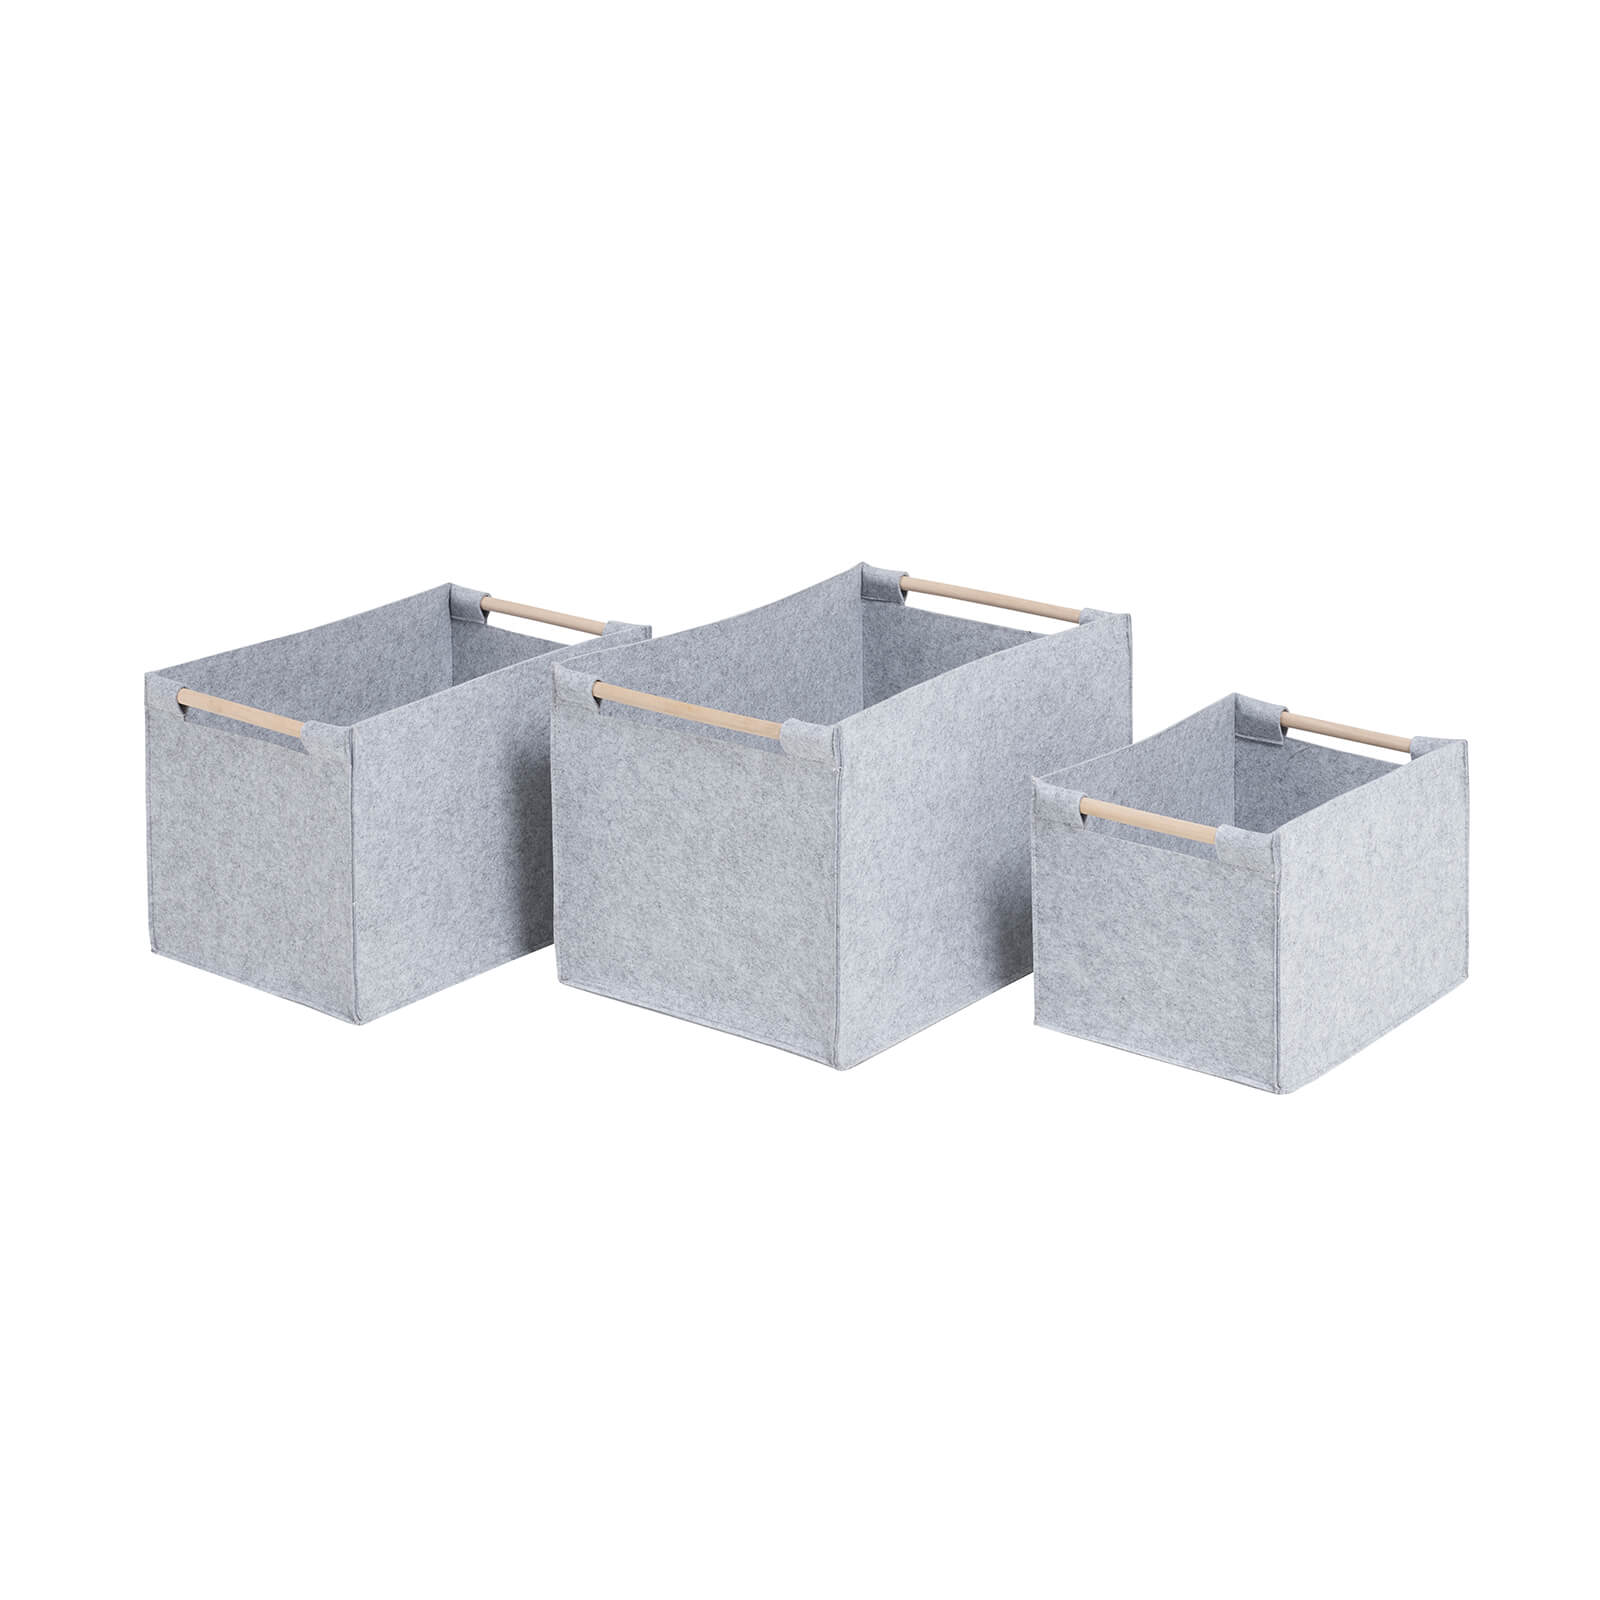 Photo of Grey Felt Baskets With Wooden Handles - Set Of 3